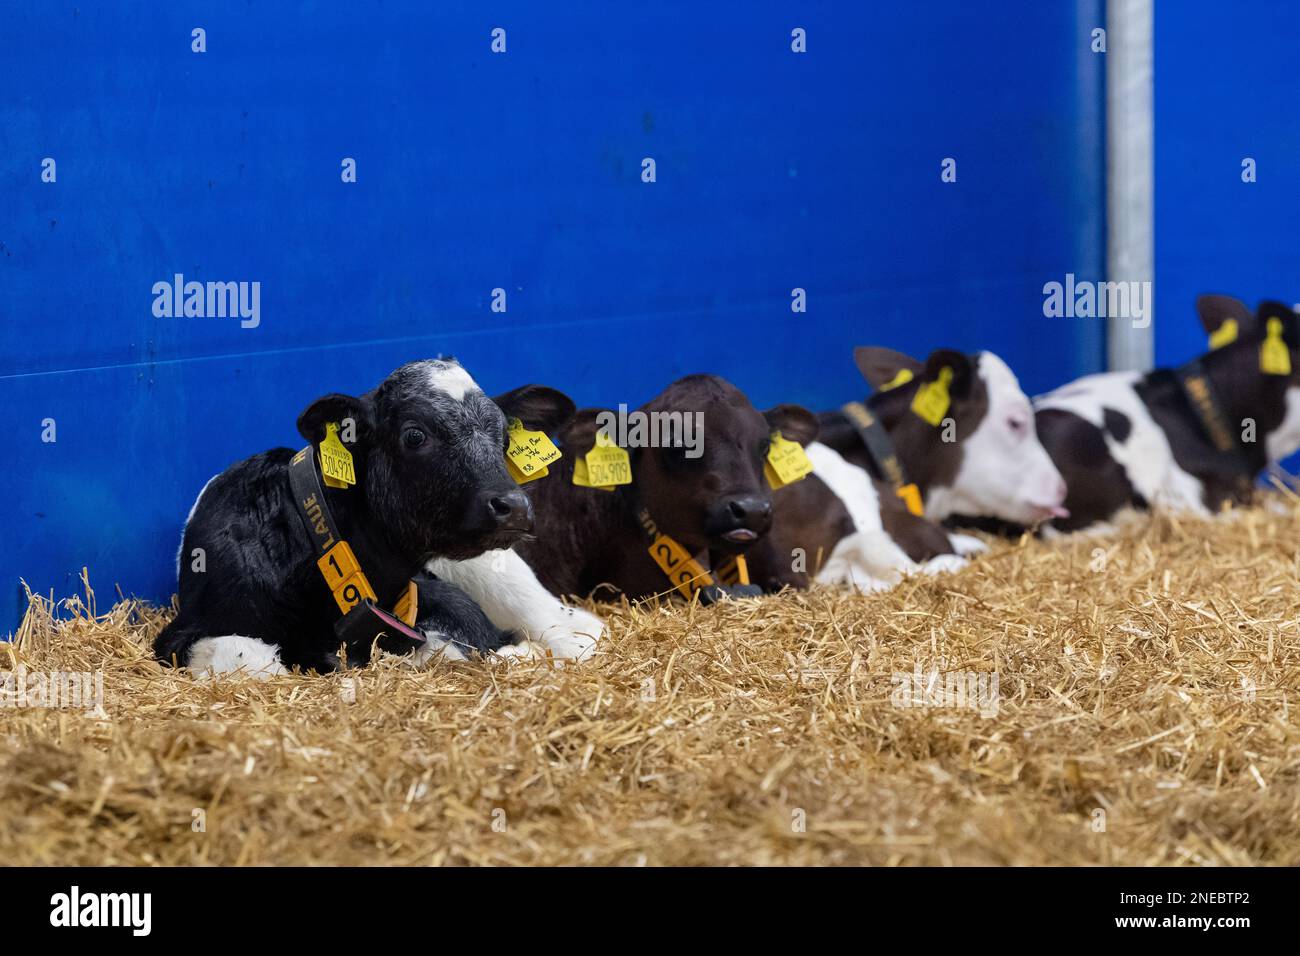 Healthy dairy calves on straw bed in a specially designed shed. Cumbria, UK. Stock Photo